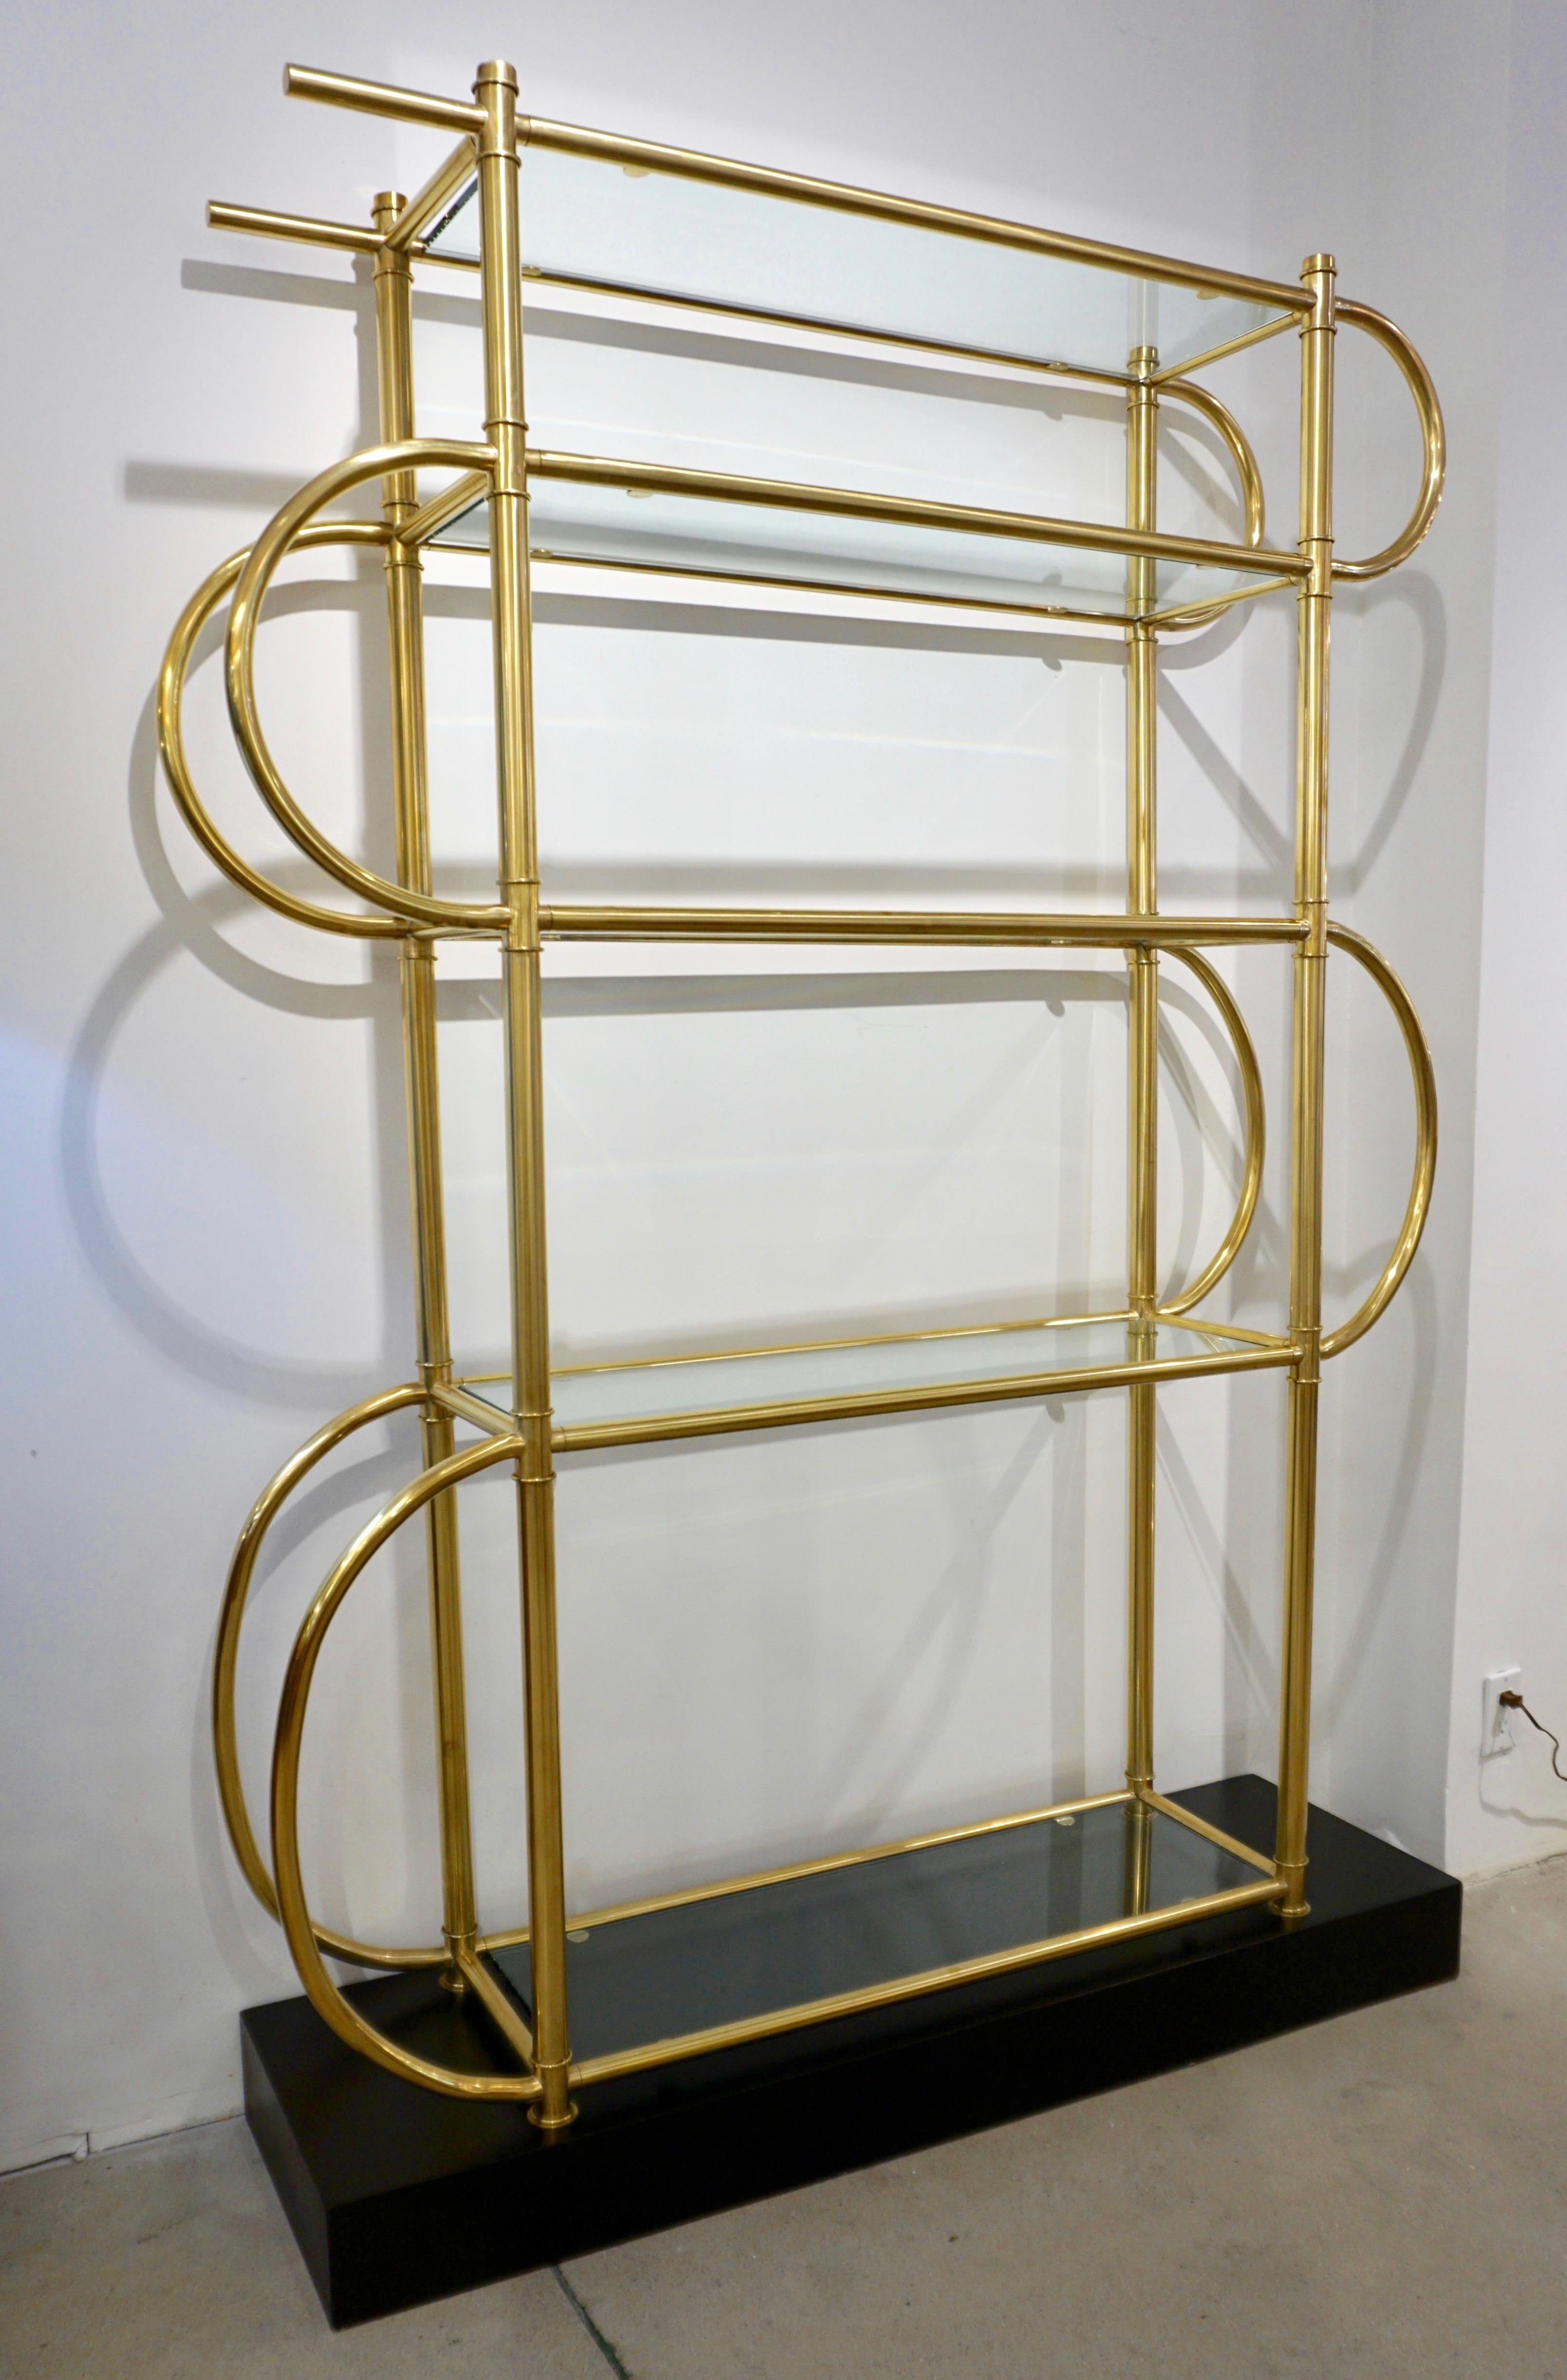 Contemporary Italian Modern Gold Brass Tubular Shelving Unit Étagère on Black Lacquered Base For Sale